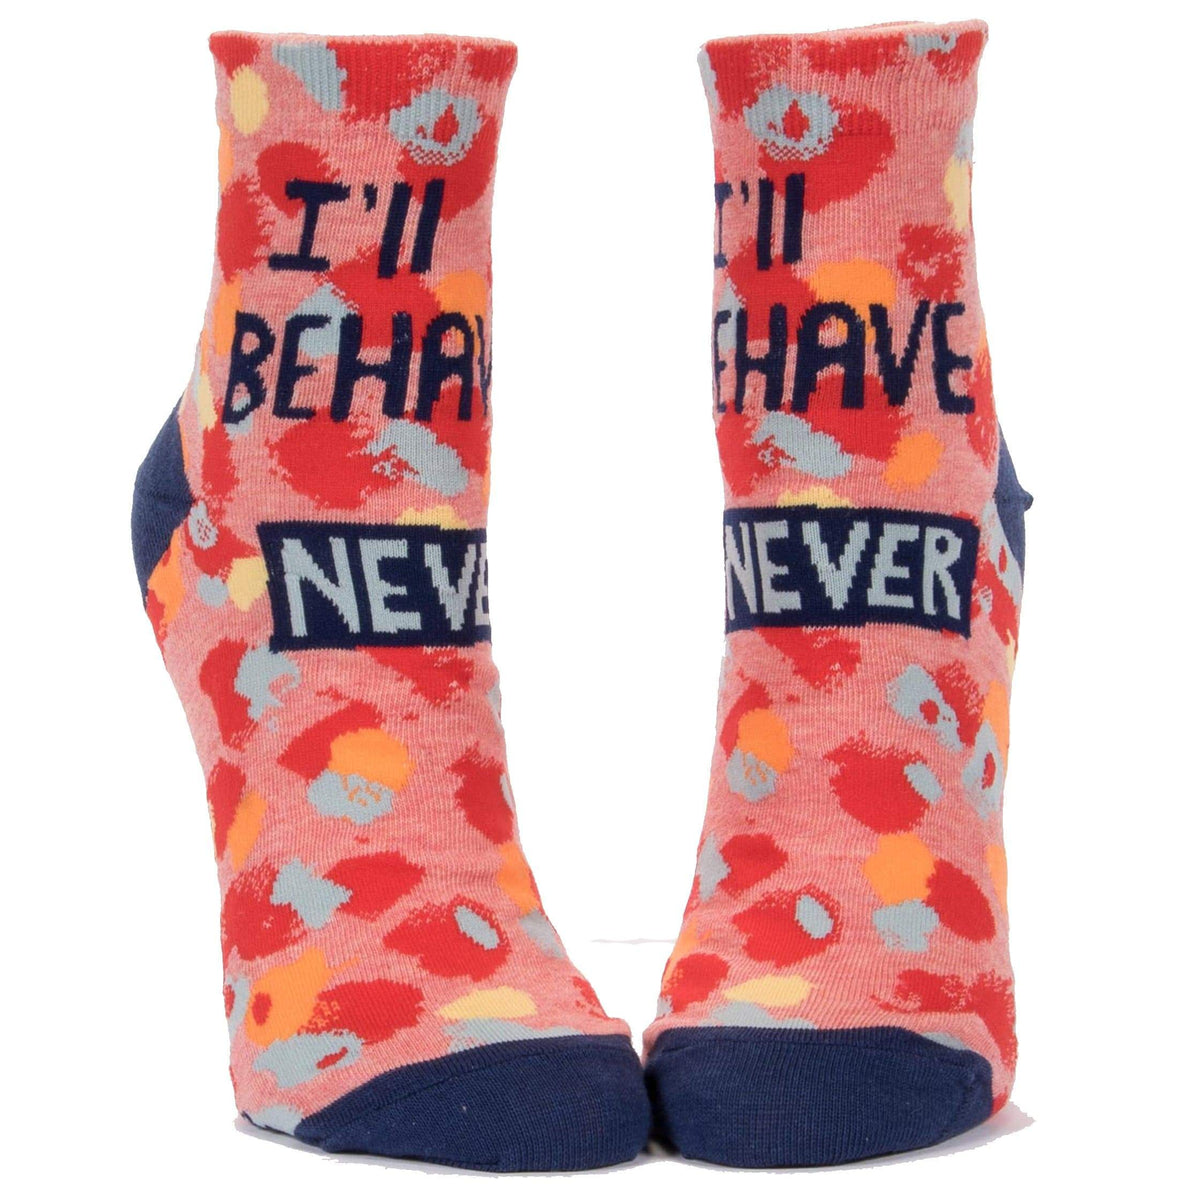 I&#39;ll Behave Never  Women&#39;s Ankle Sock pink